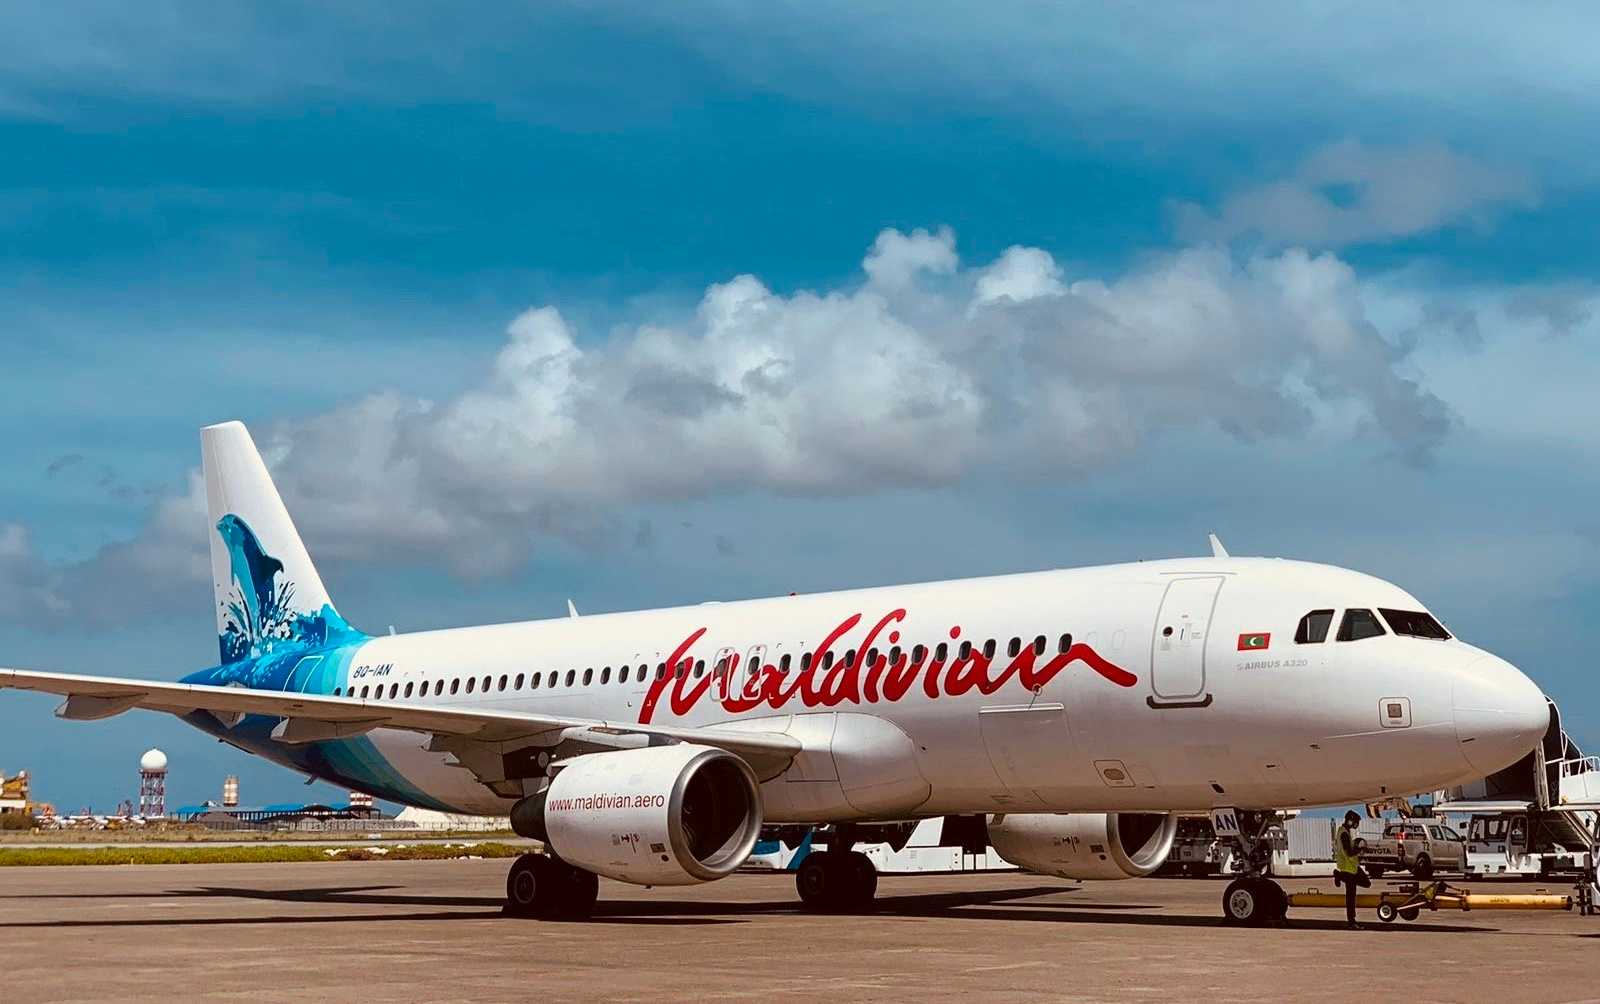 BIA welcomes Maldivian Airlines